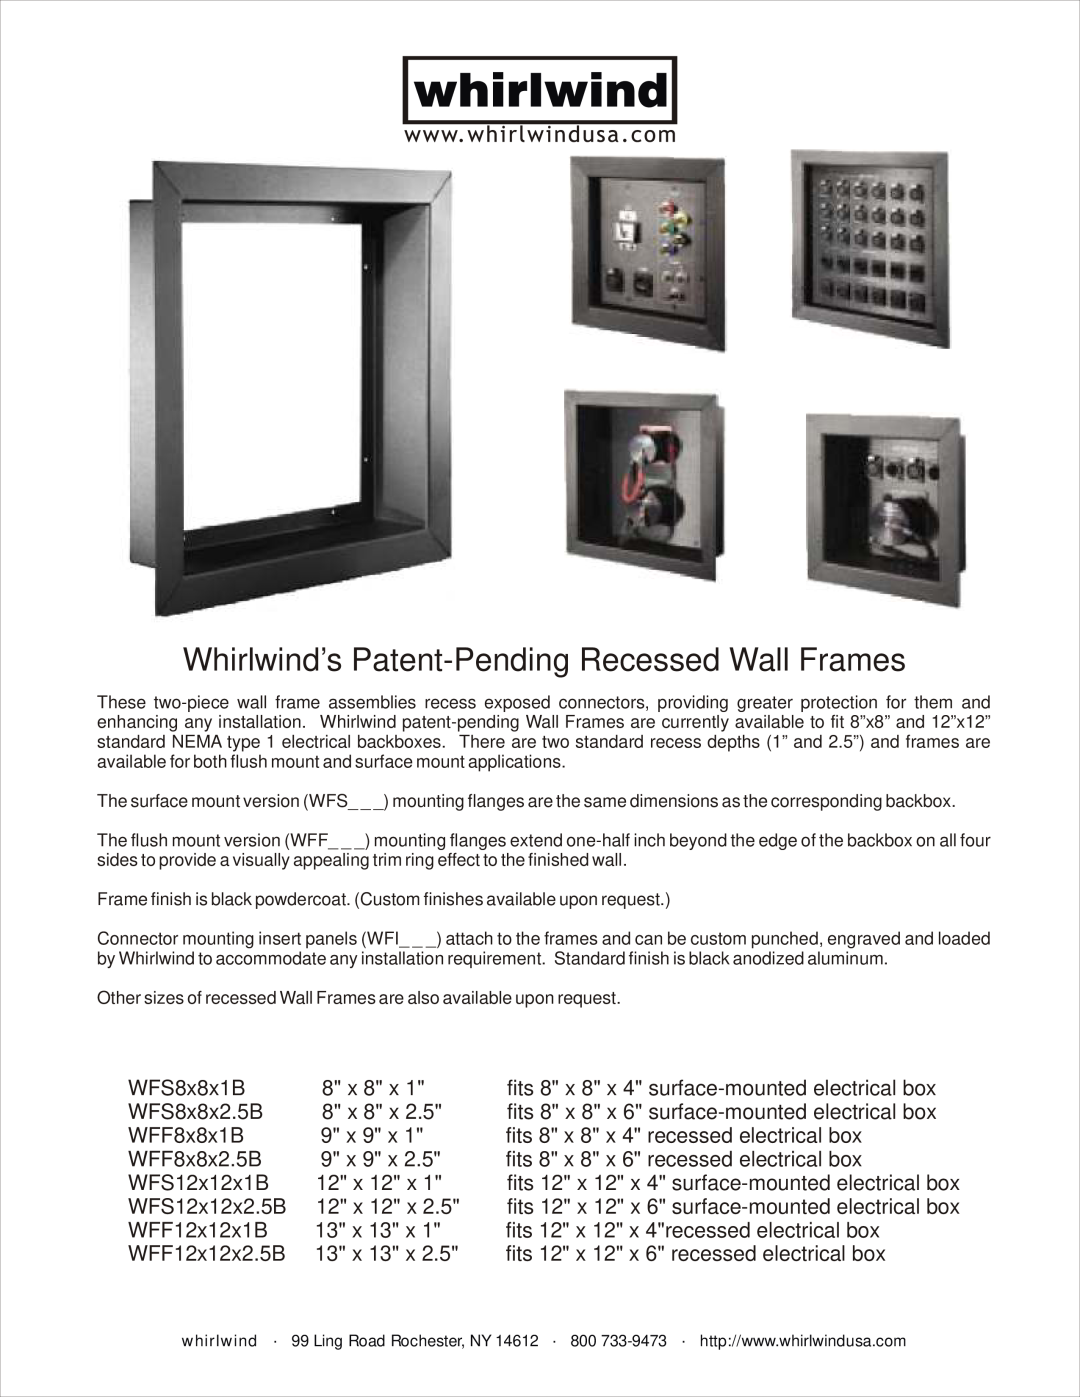 Whirlwind Patent-Pending Recessed Wall Frames dimensions Whirlwind’s Patent-PendingRecessed Wall Frames 